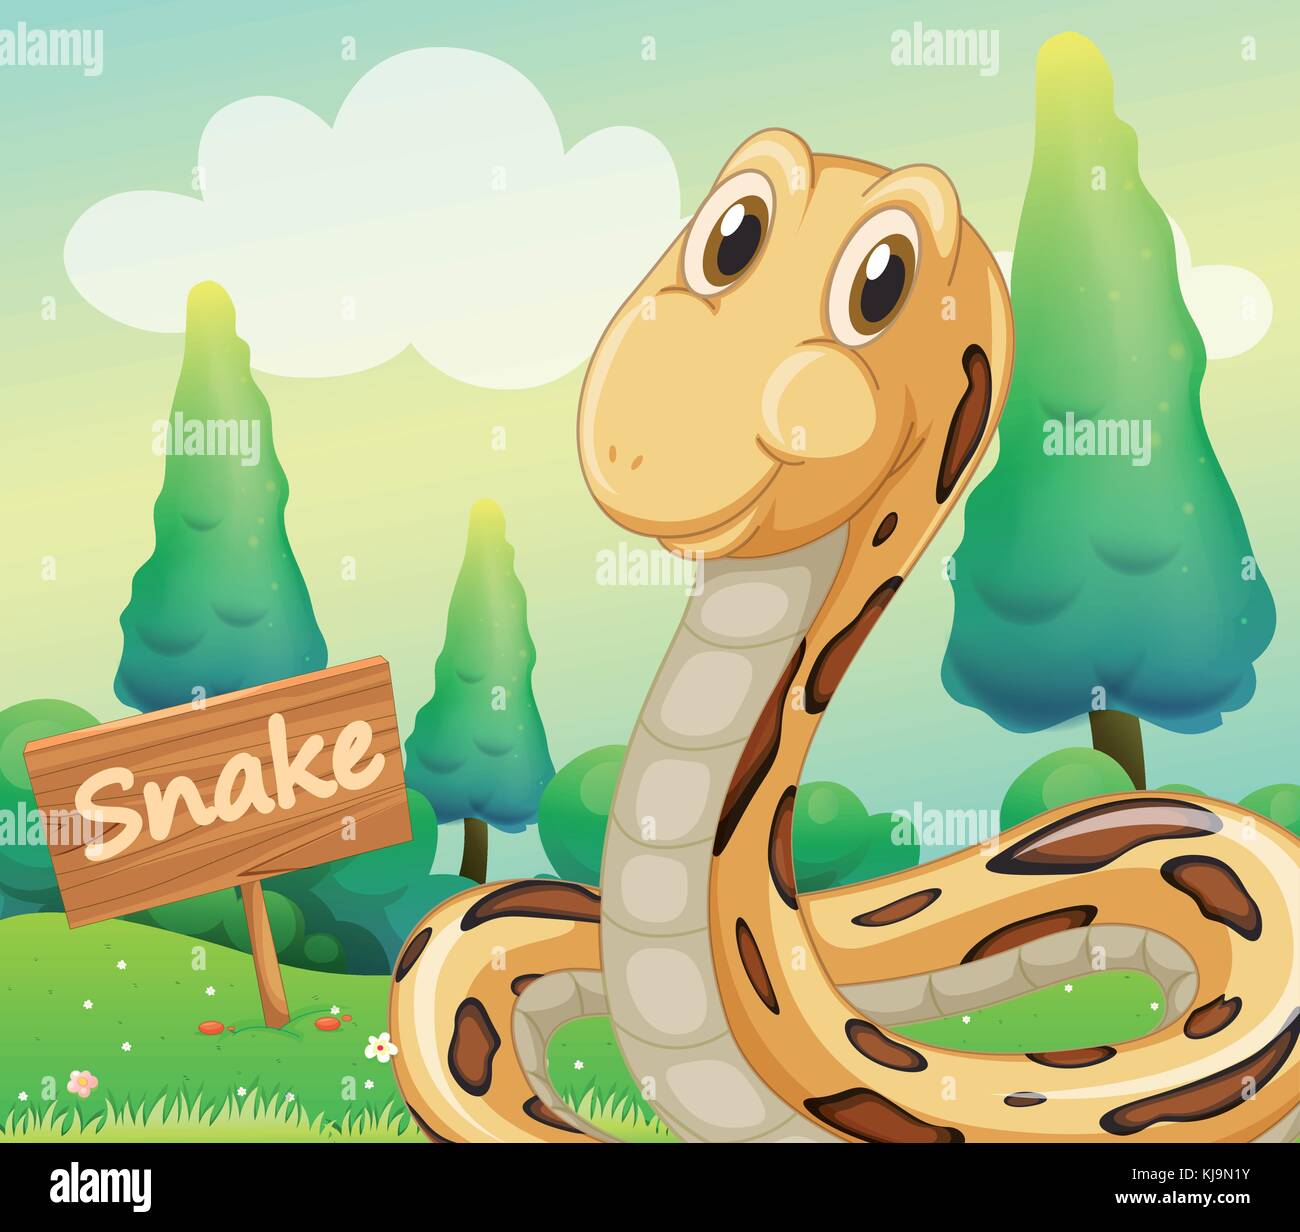 Illustration of a snake beside a wooden signage Stock Vector